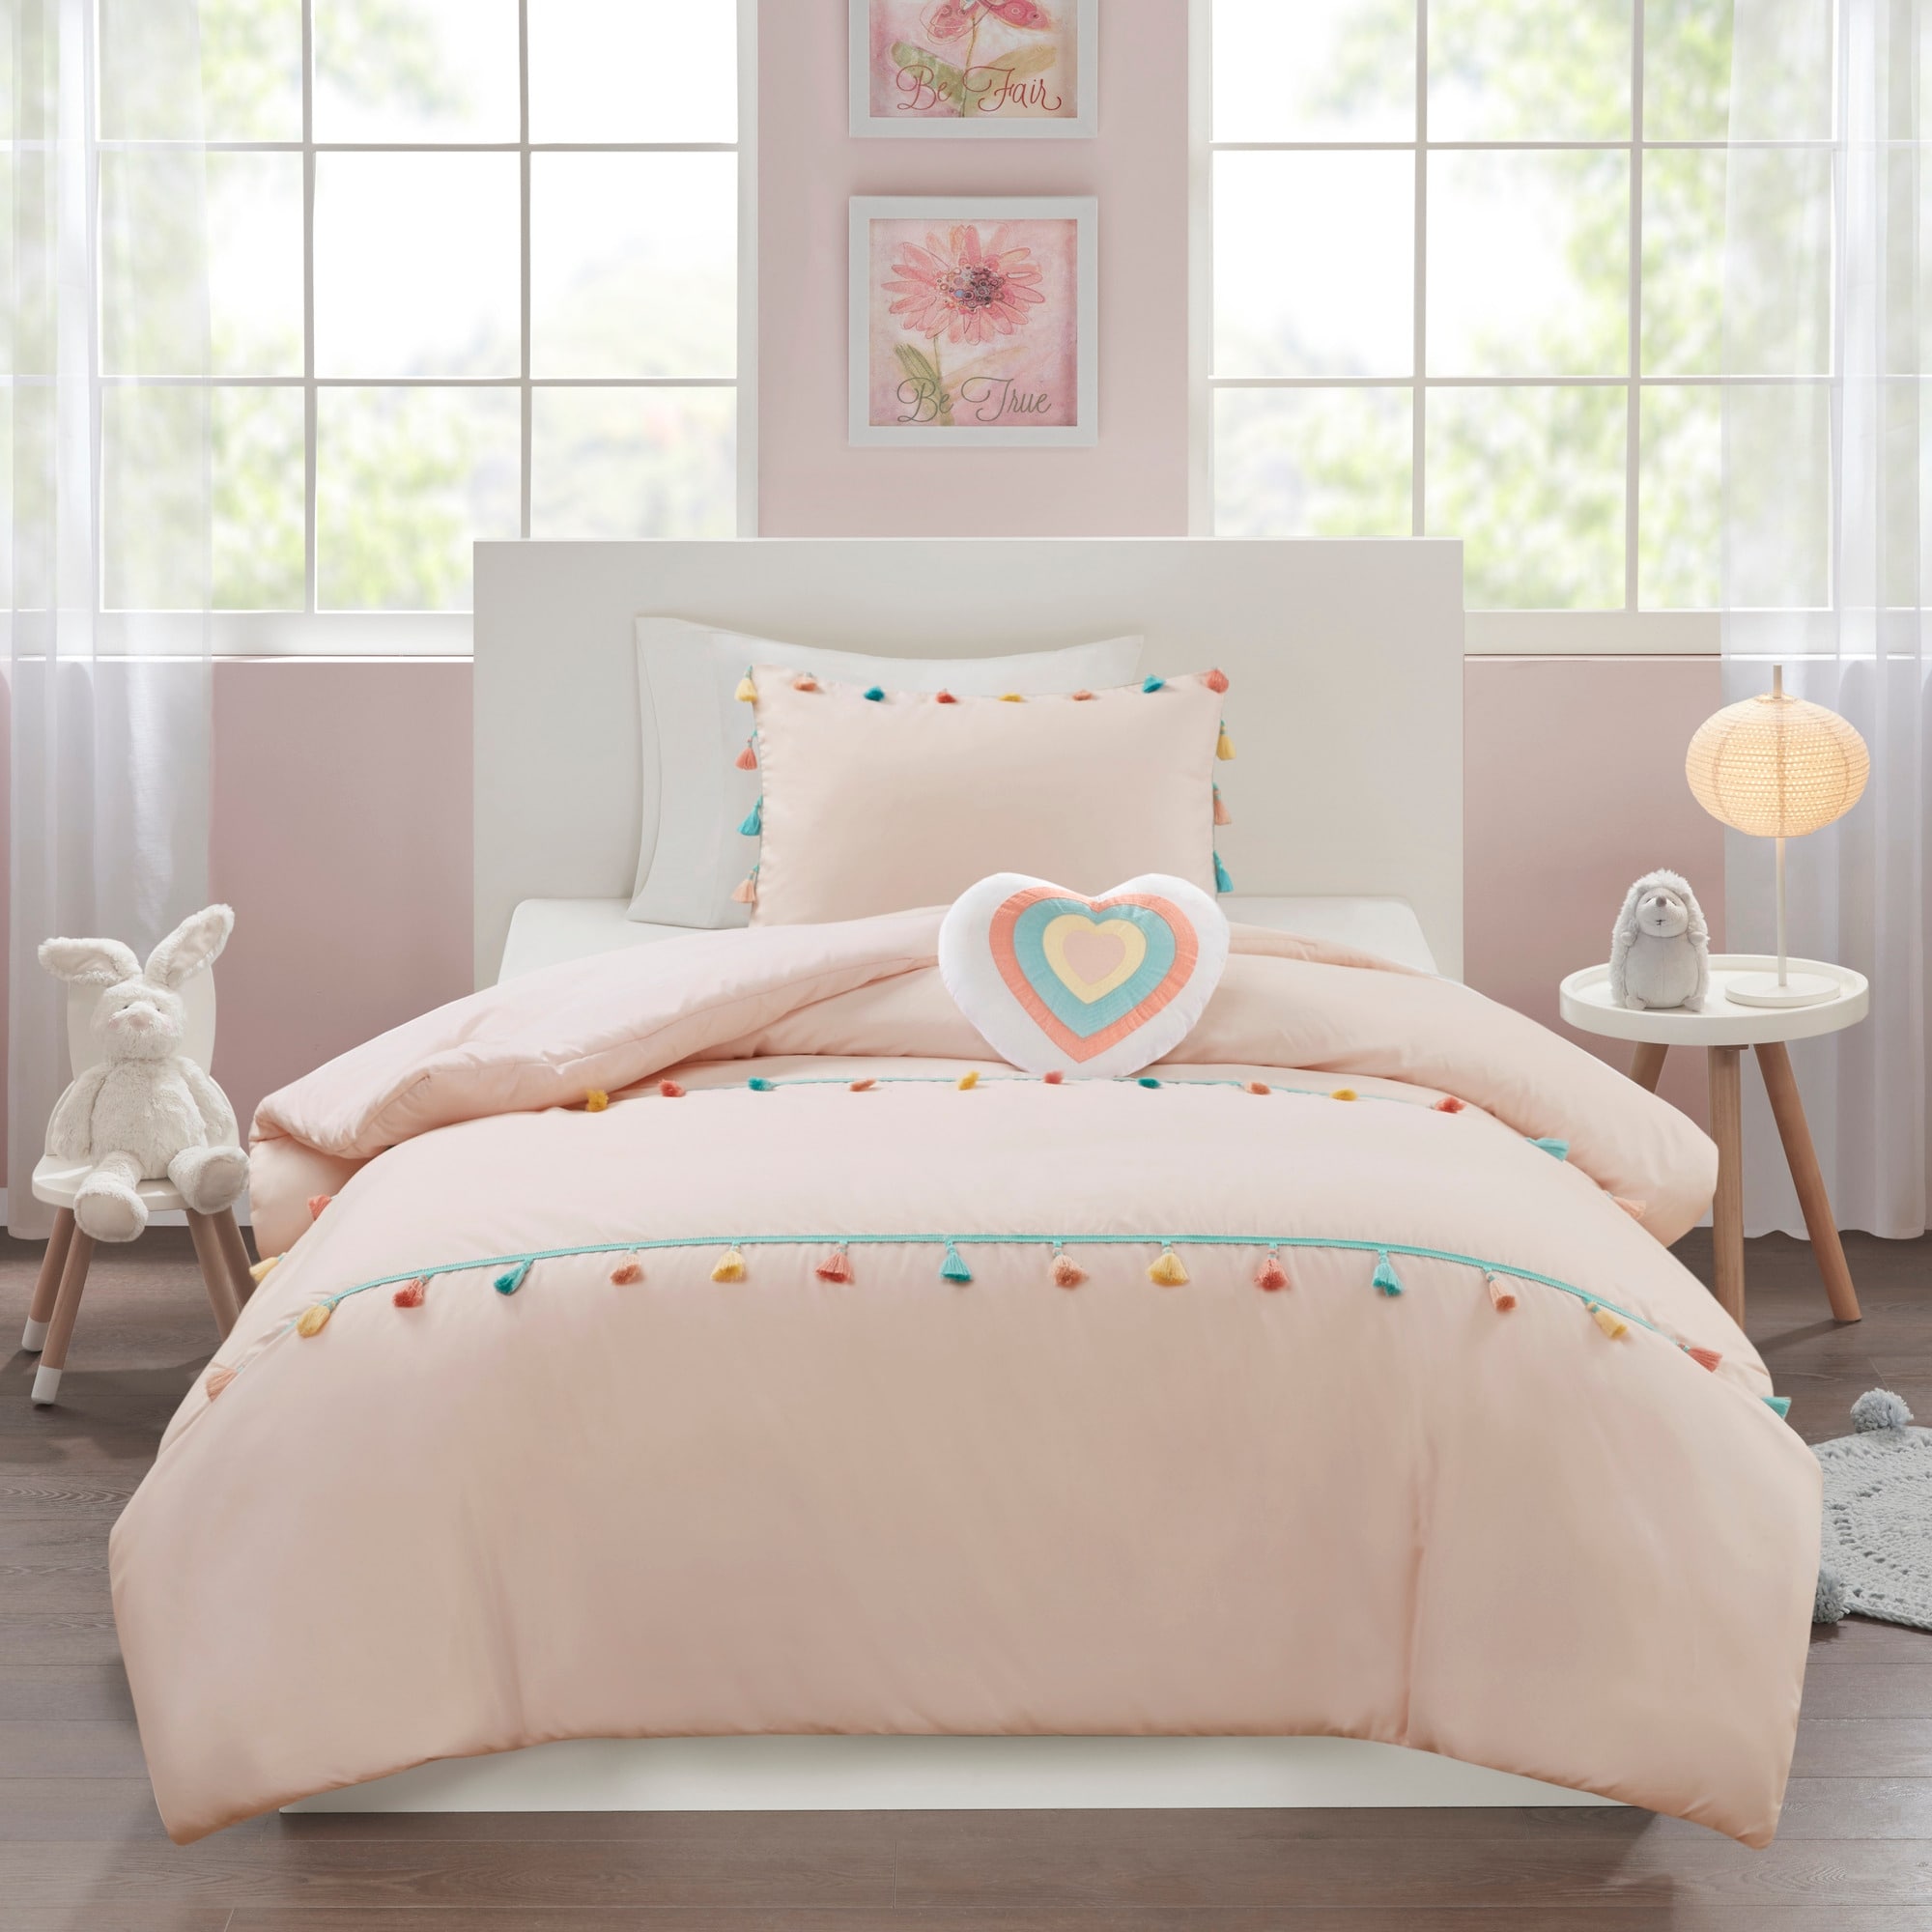 https://ak1.ostkcdn.com/images/products/is/images/direct/ae662ed65c77120869549657747b468fc9e67075/Mi-Zone-Kids-Tanya-Tassel-Comforter-Set-with-Heart-Shaped-Throw-Pillow.jpg